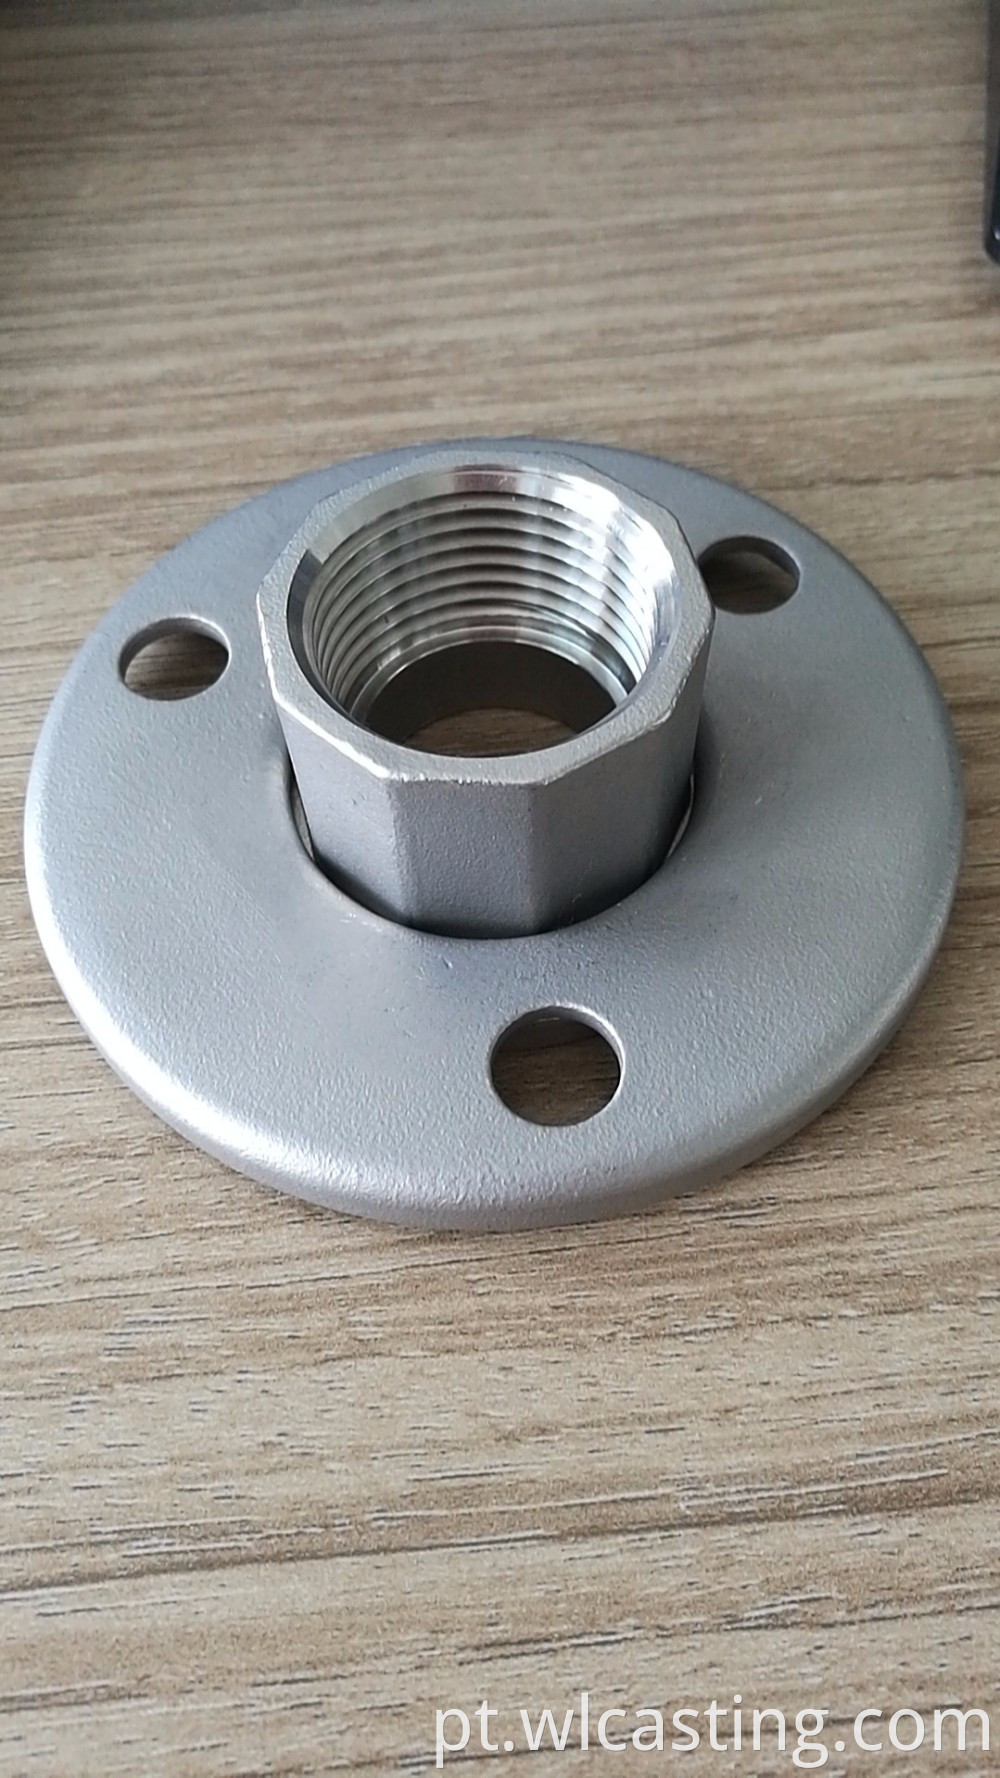 investment casting foundry flange plate cnc machining thread hole